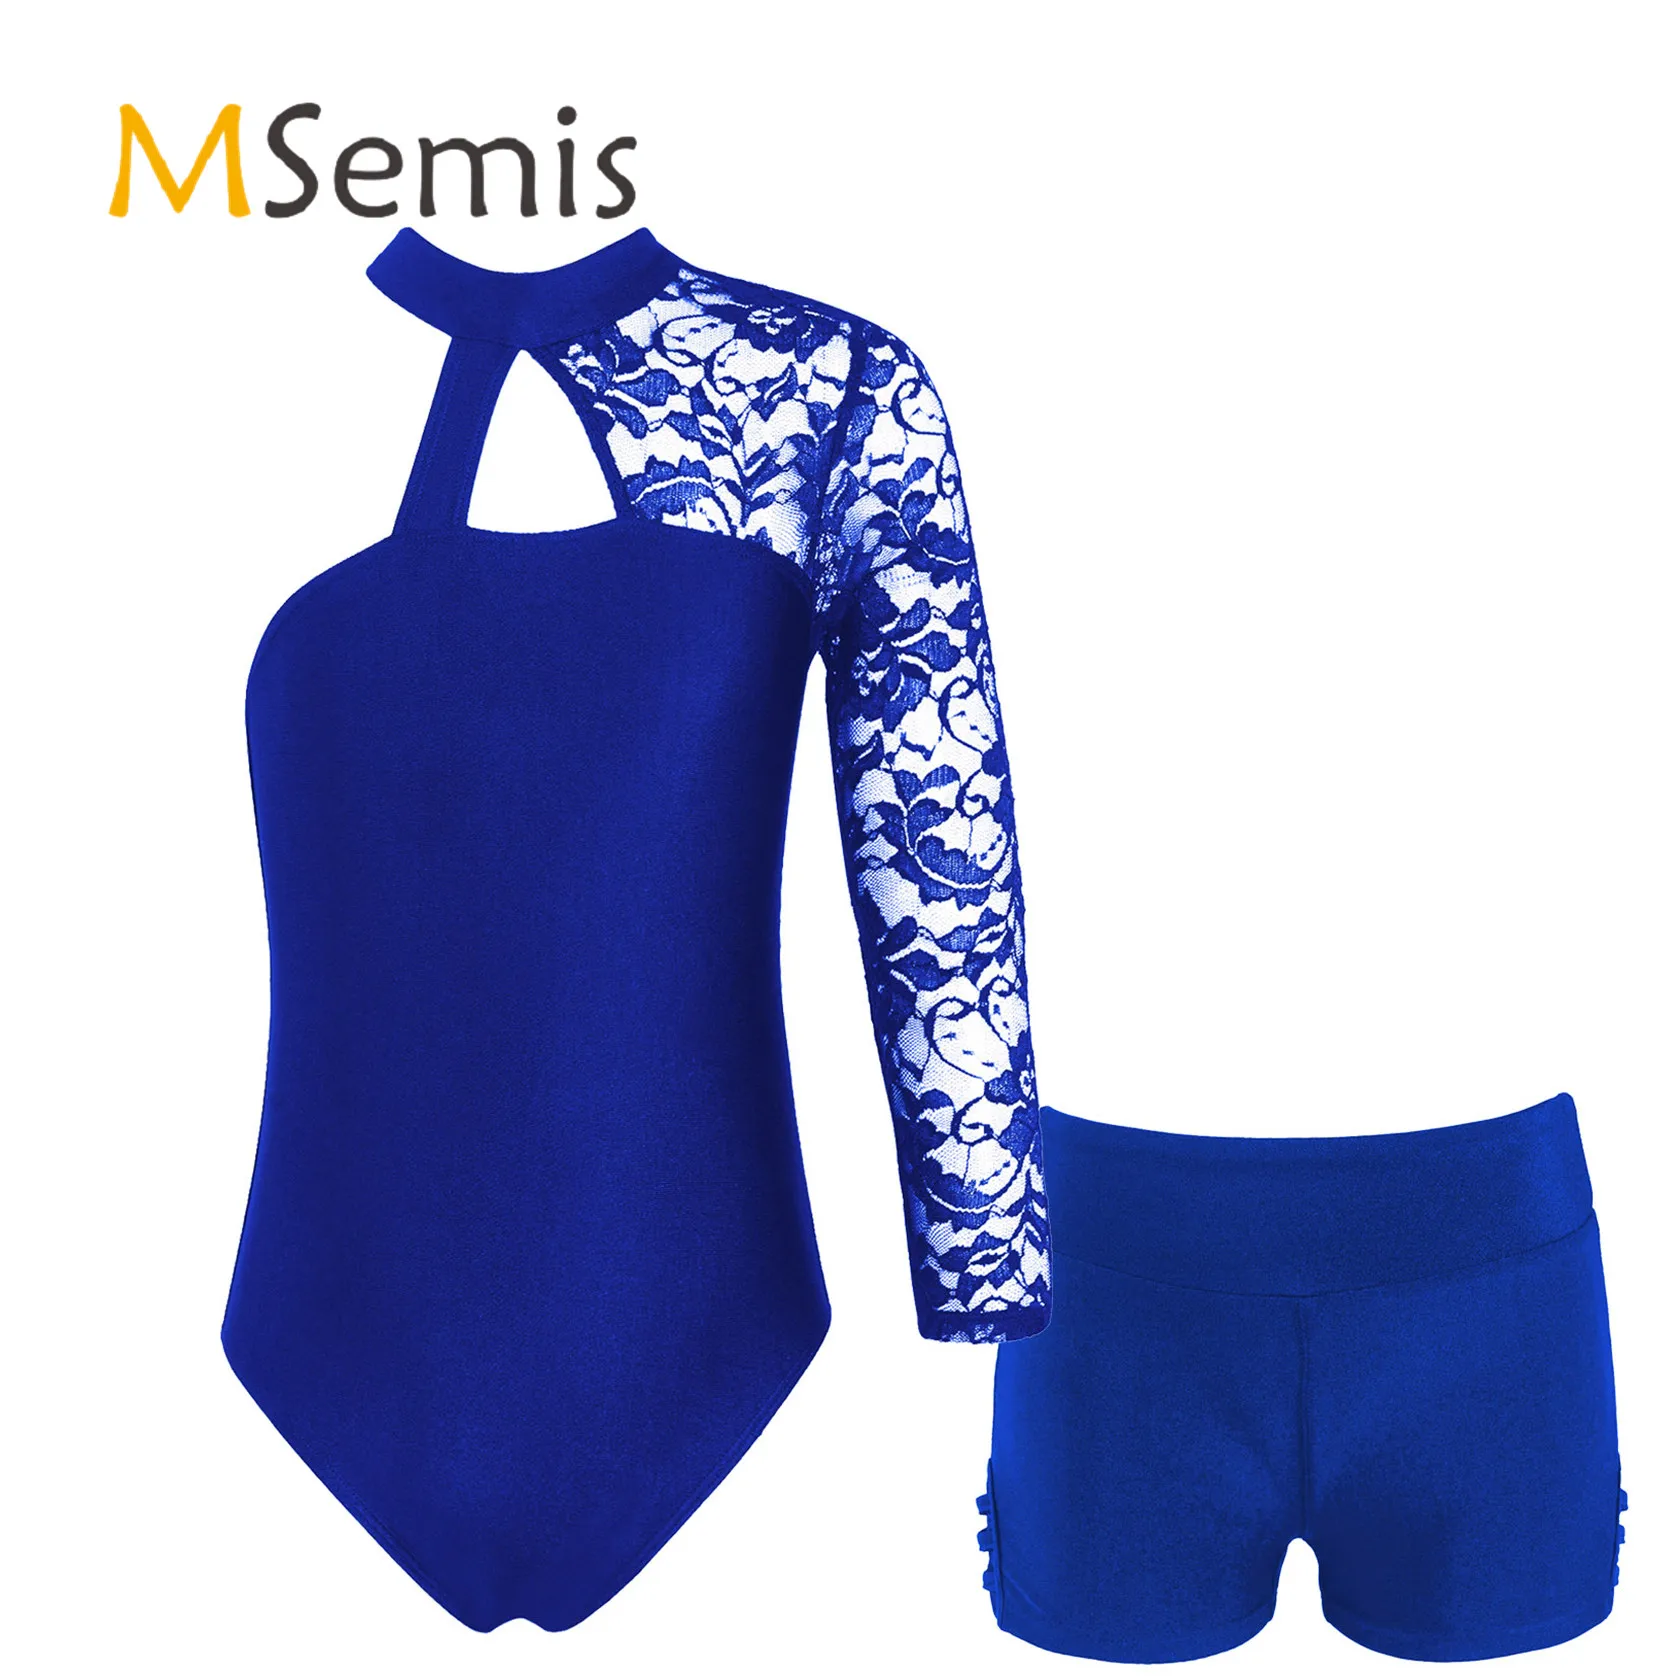 

Kids Girls Gymnastics Ballet Dancewear Lace Long Sleeve Ballet Leotards Jumpsuit with Wide Elastic Waistband Strappy Side Shorts